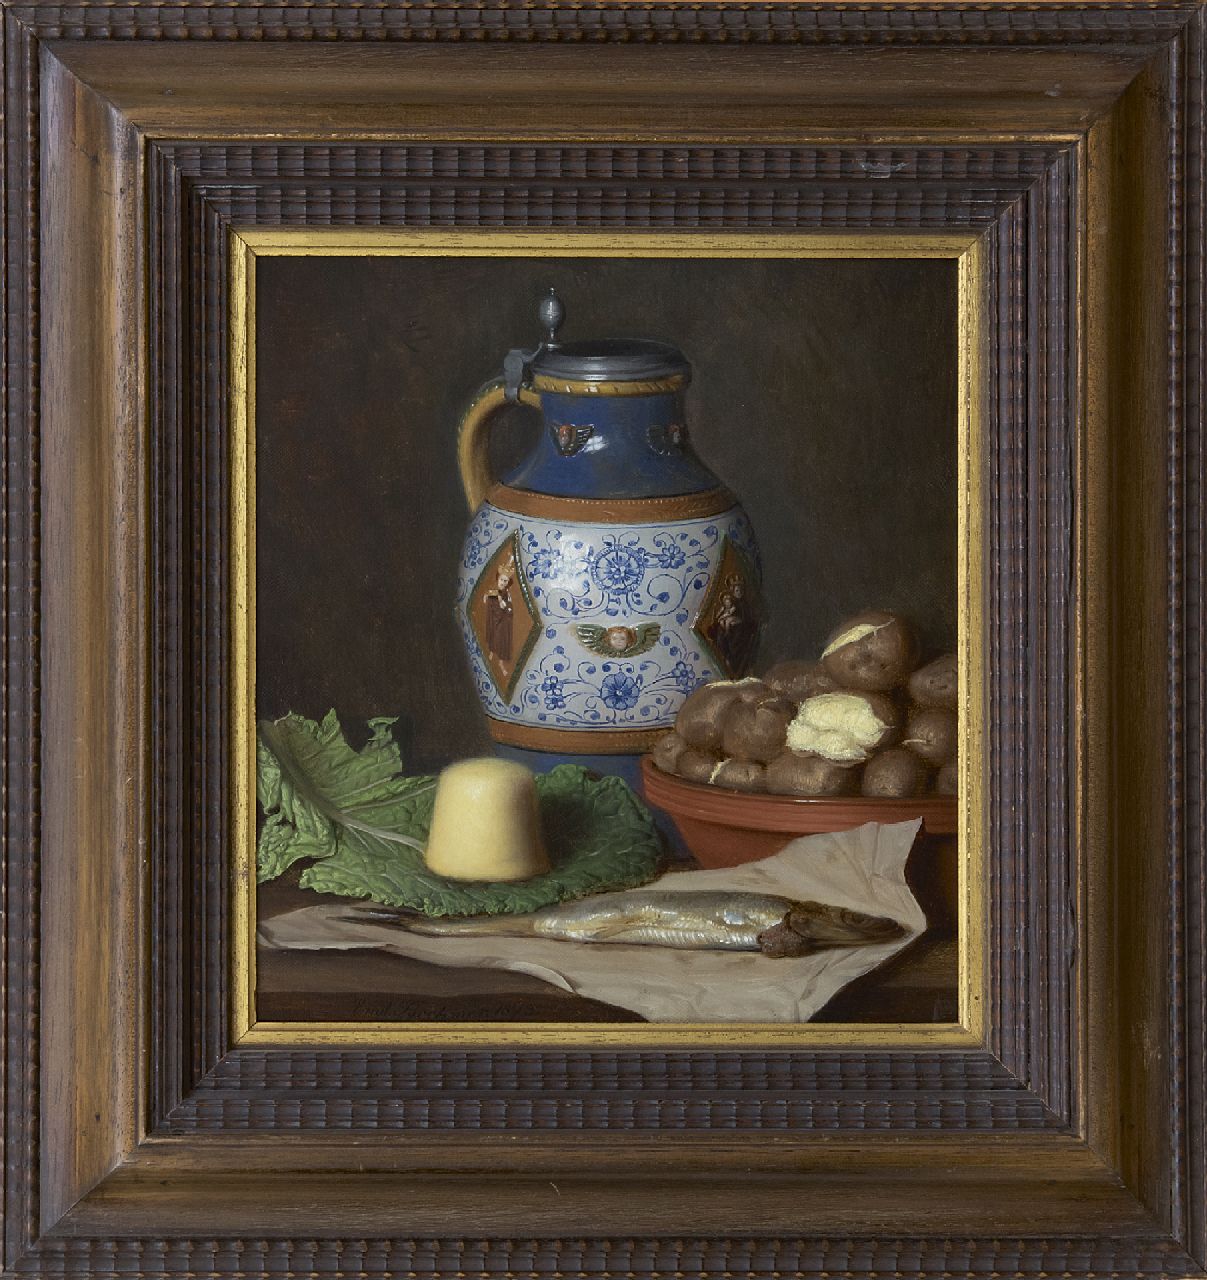 Brehmer E.  | Emil Brehmer | Paintings offered for sale | A kitchen still life, oil on canvas 31.0 x 28.4 cm, signed l.l. and dated 1873